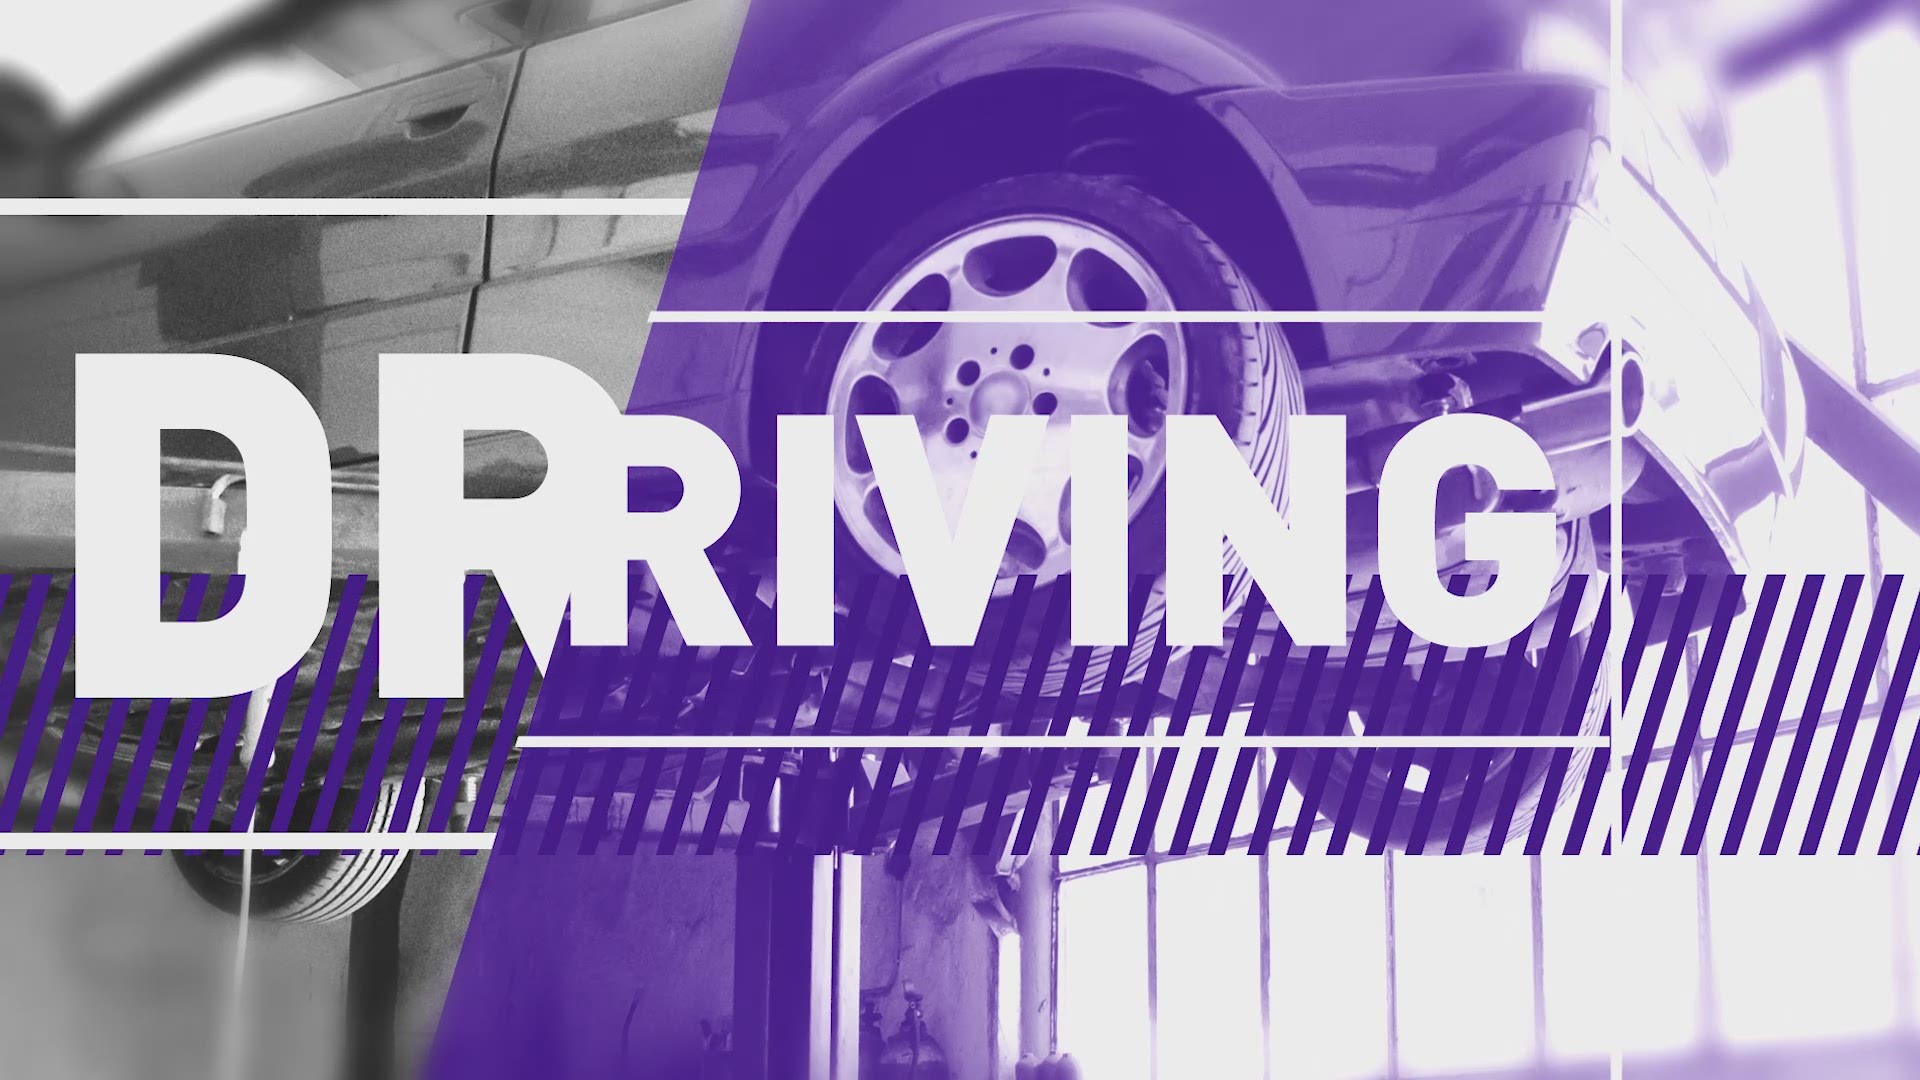 Oct. 21 marks the start of Teen Driver Safety Week, serving as an important reminder for teens the rules and responsibilities in driving. Matt Schmitz goes over it all in this week's segment of Driving Smart.